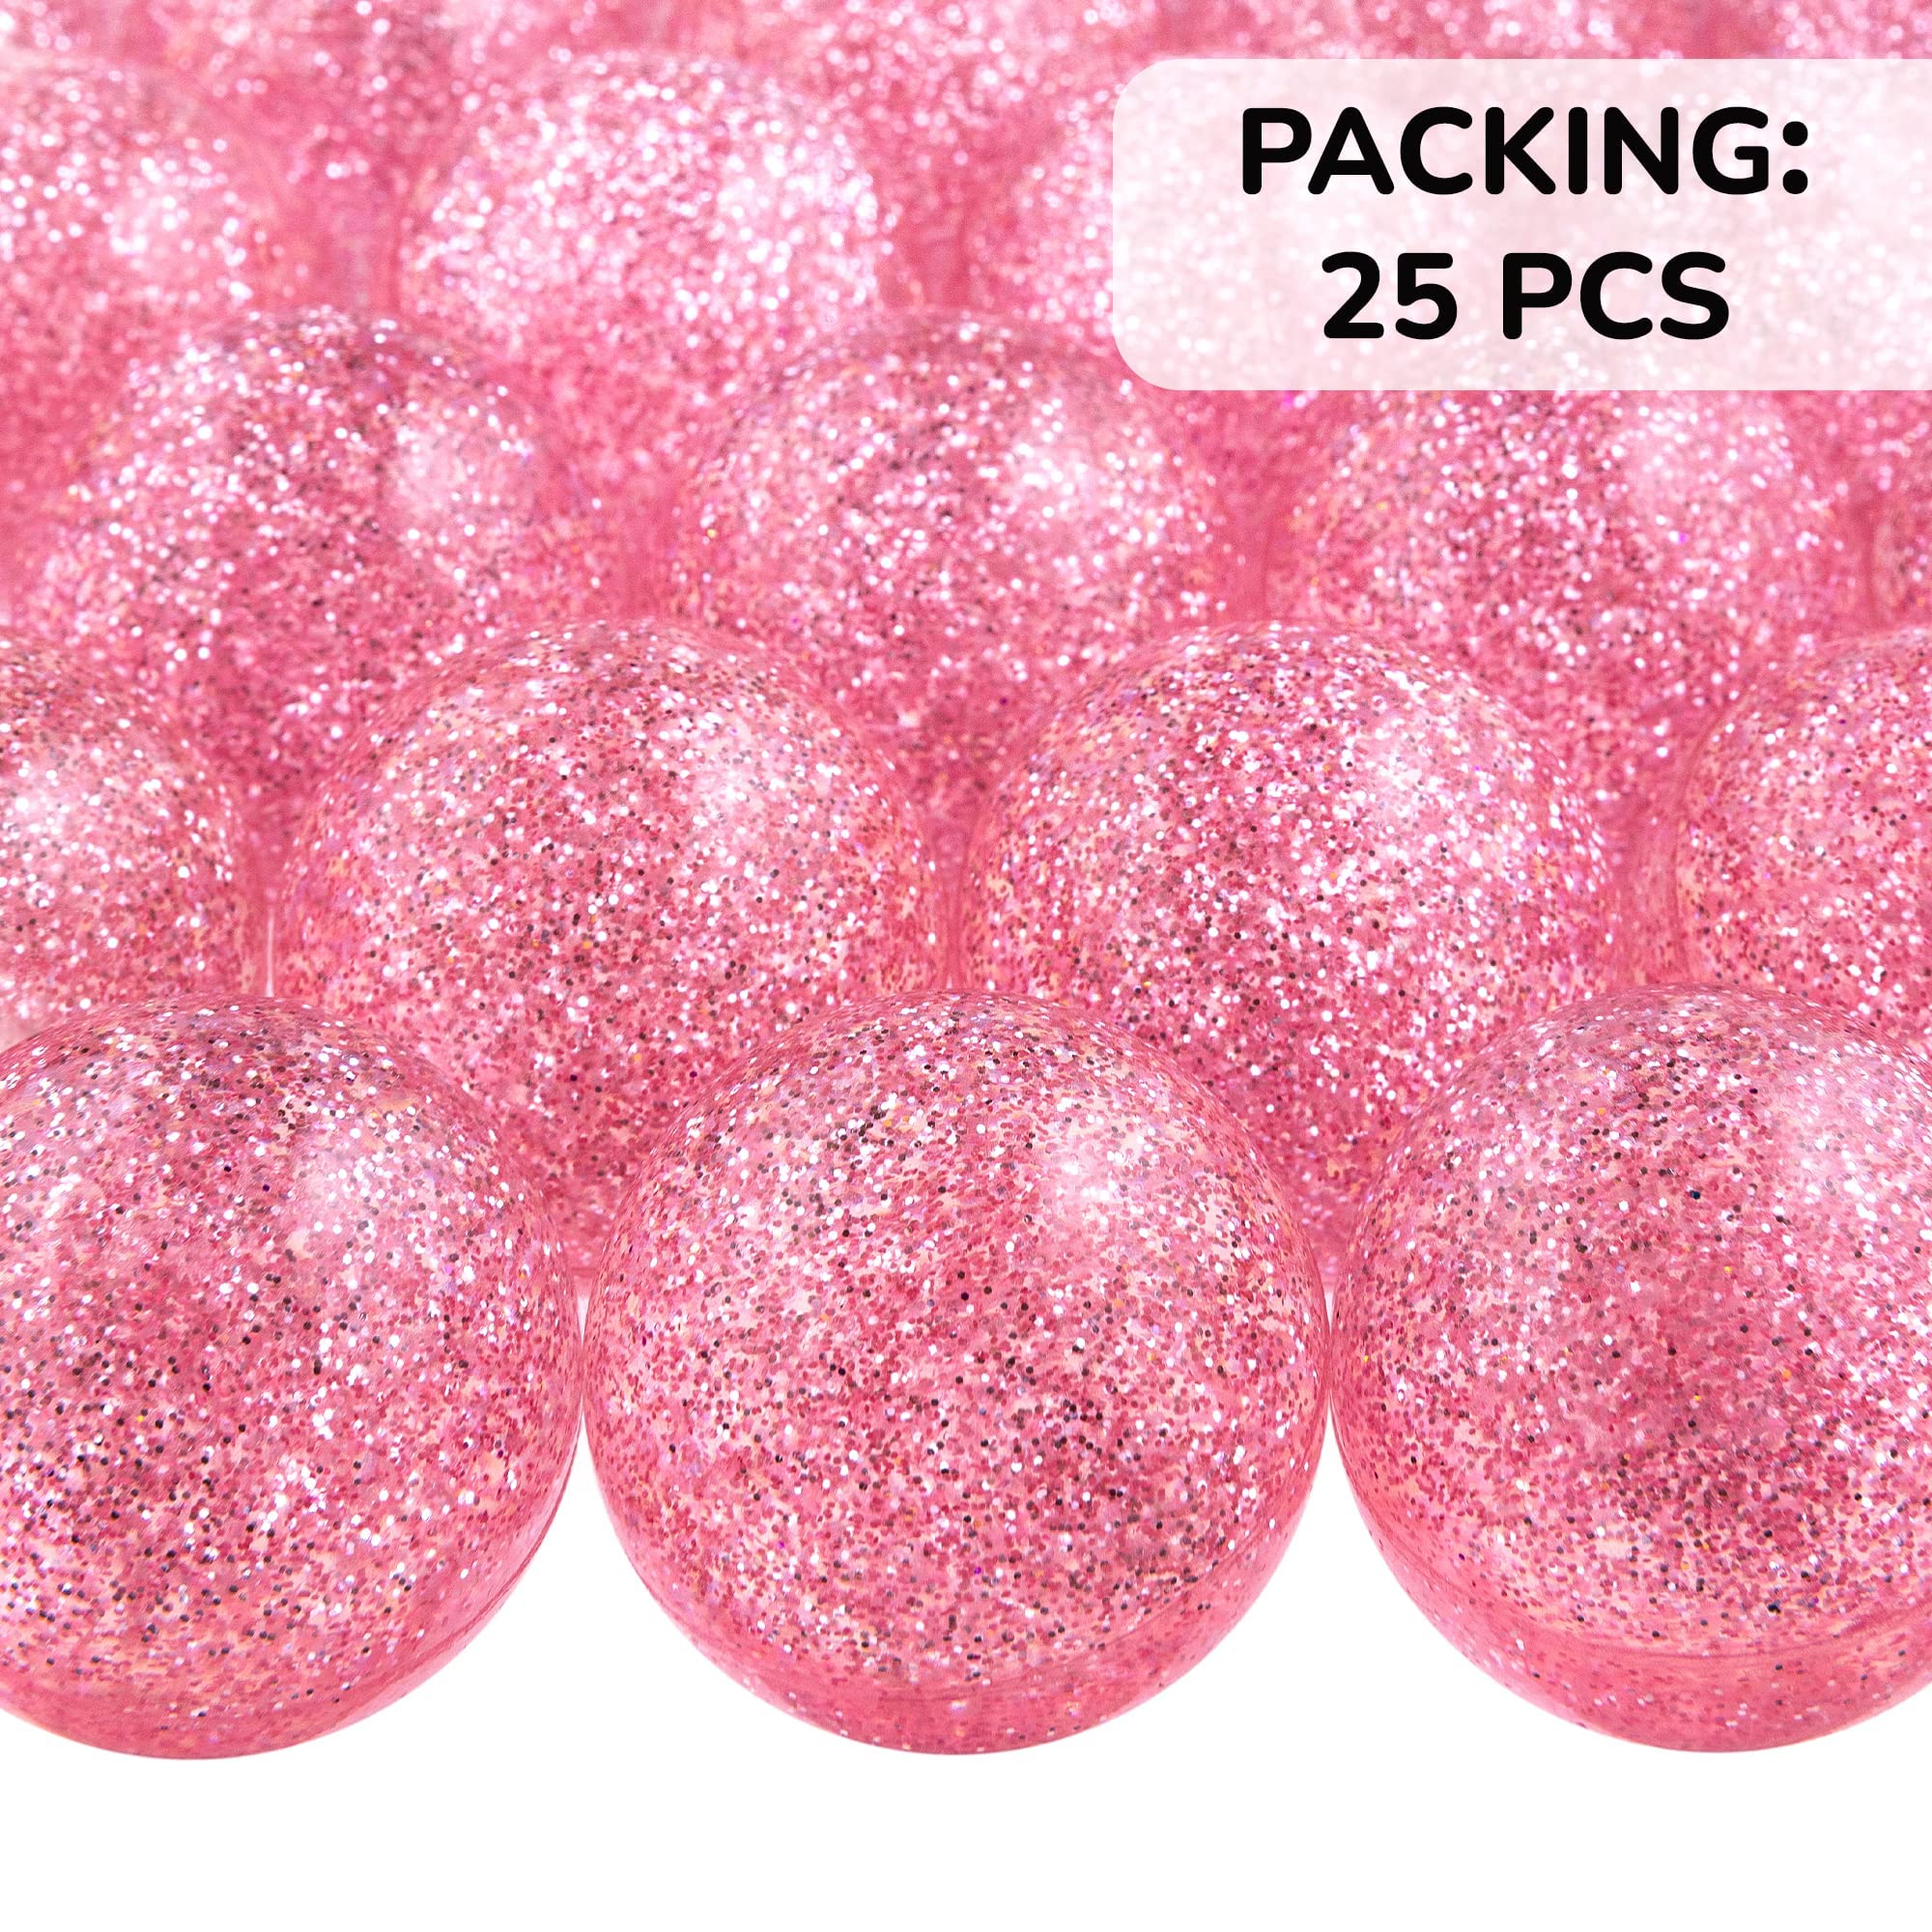 Entervending Bouncy Balls - Pink Glitter Bouncy Balls - Party Favors and Gifts for Kids - Rubber Balls - 25 Pcs Large Bouncy Balls 45mm - Vending Machine Toys - Goodie Bag Fillers